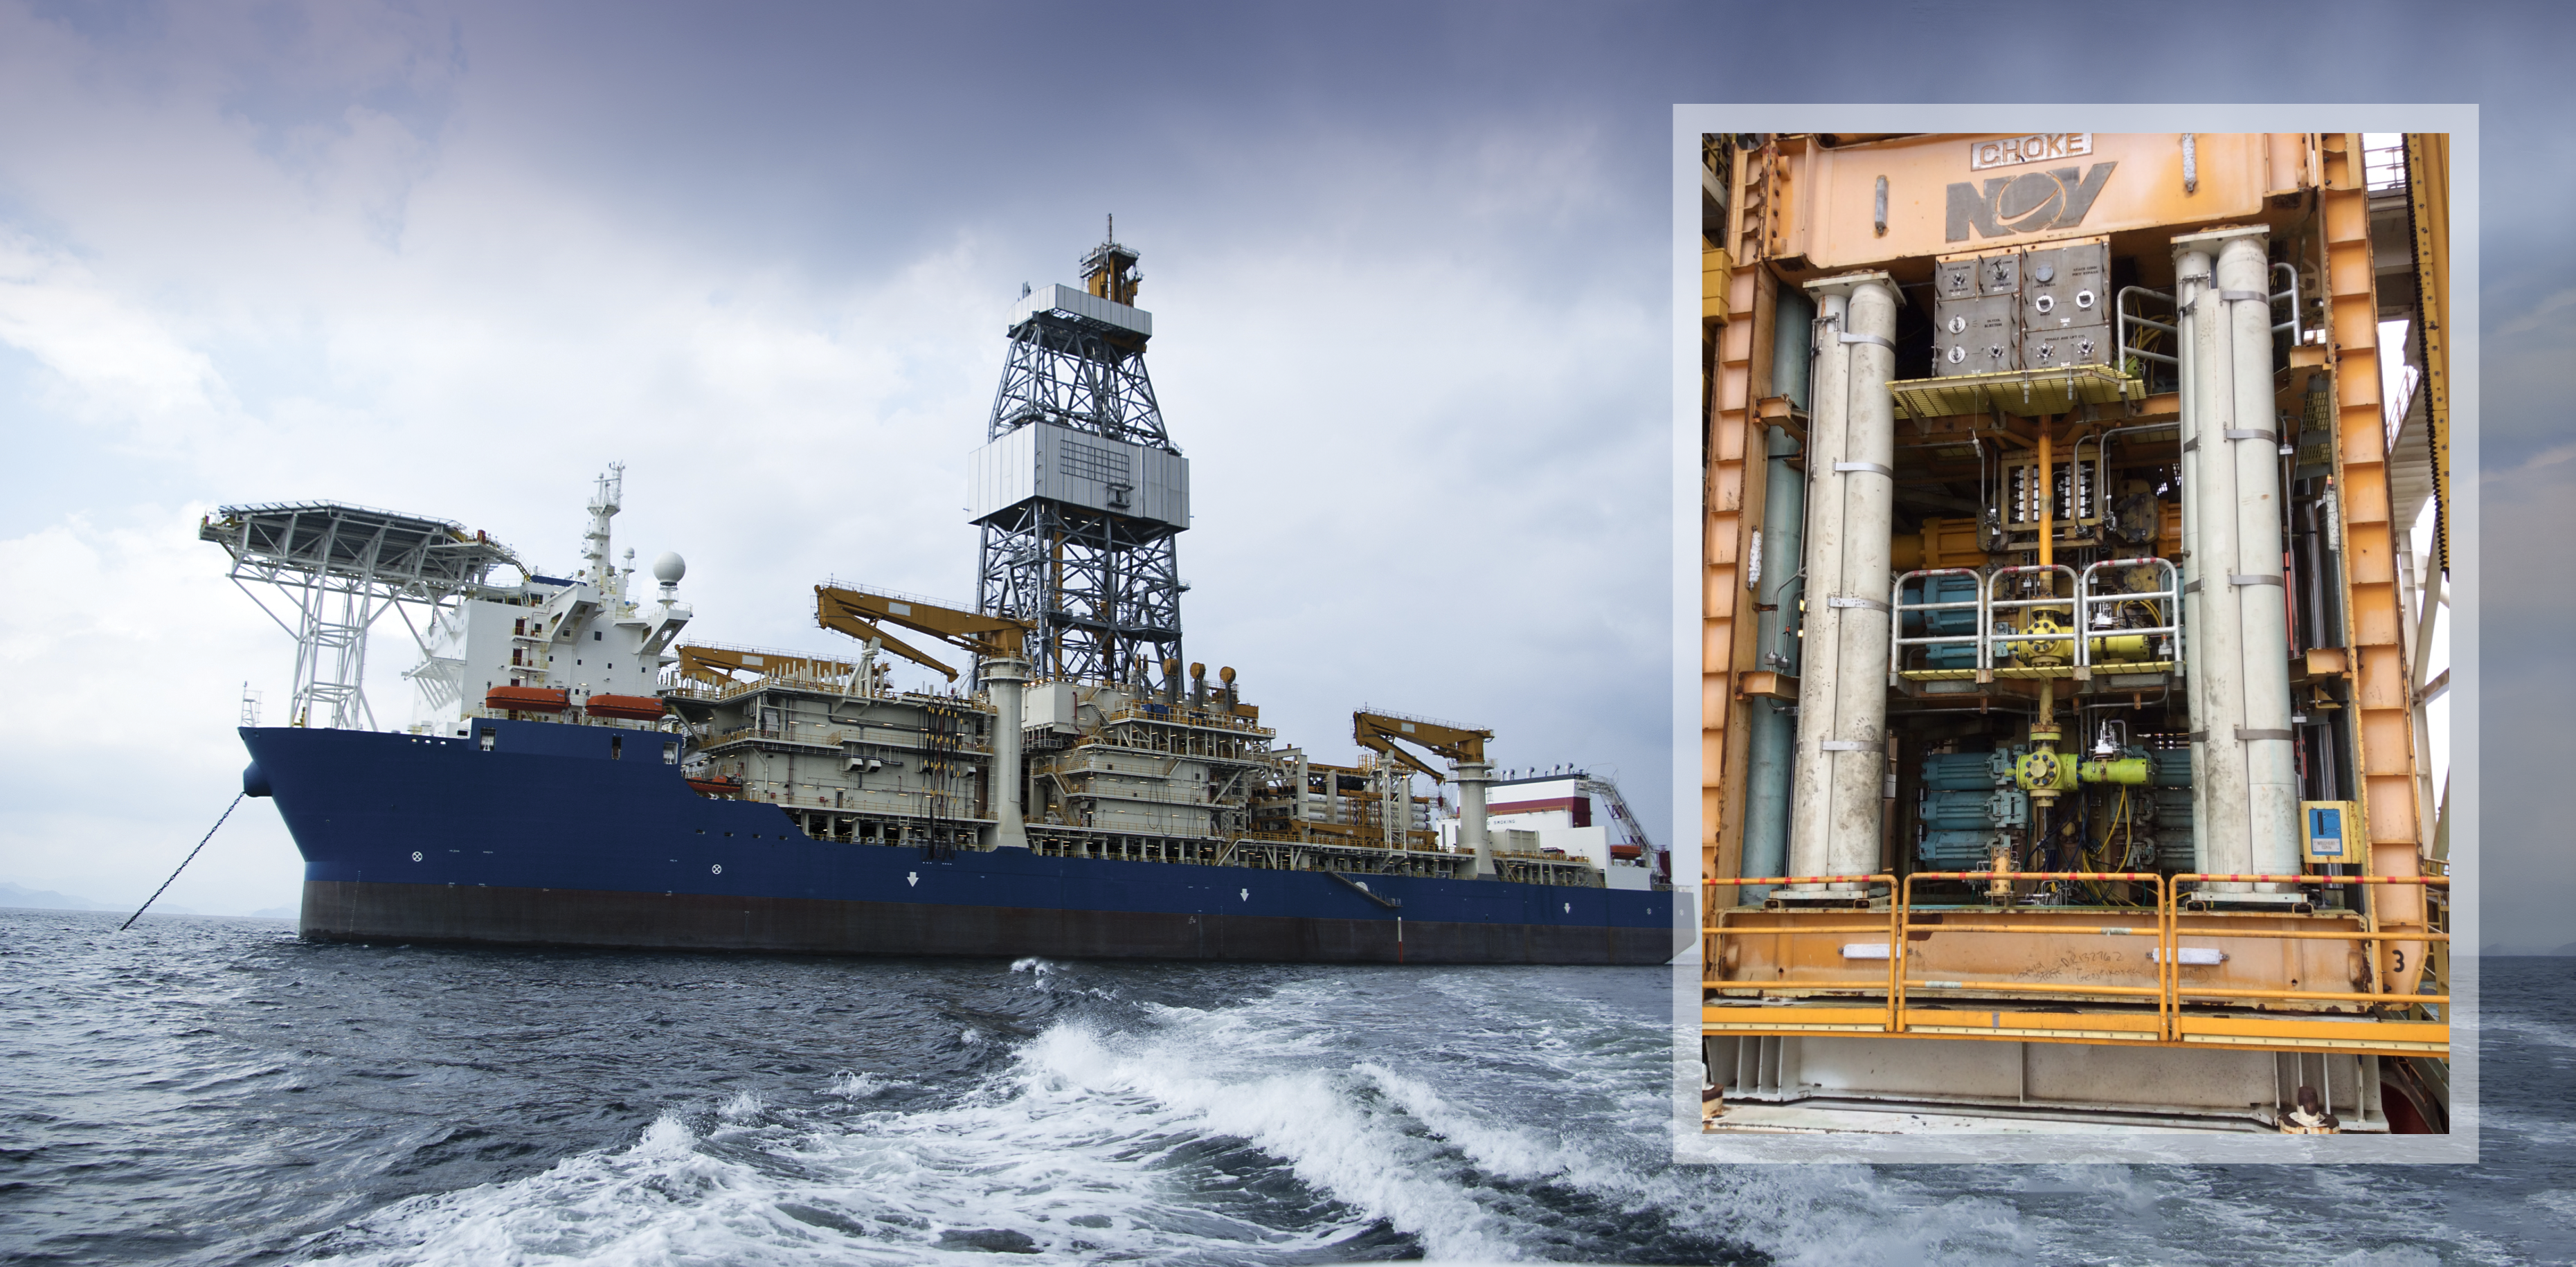 Reel Power Marine & Energy Celebrates the 10th Anniversary of their 1st Depth Compensated Accumulators (DCB) Deployment